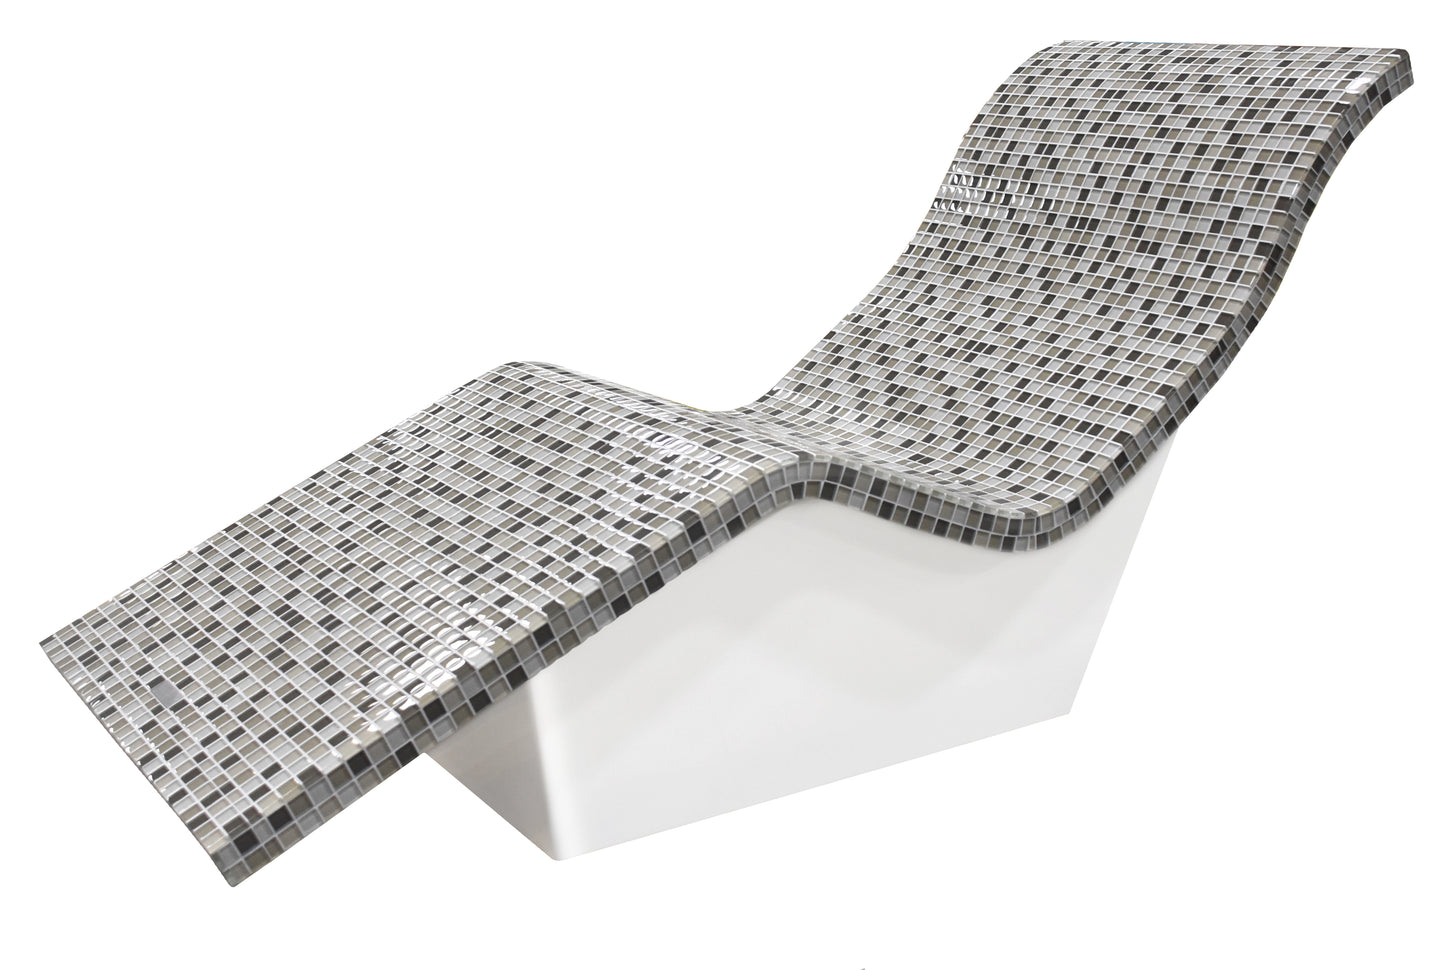 Heated Lounger Tile Top